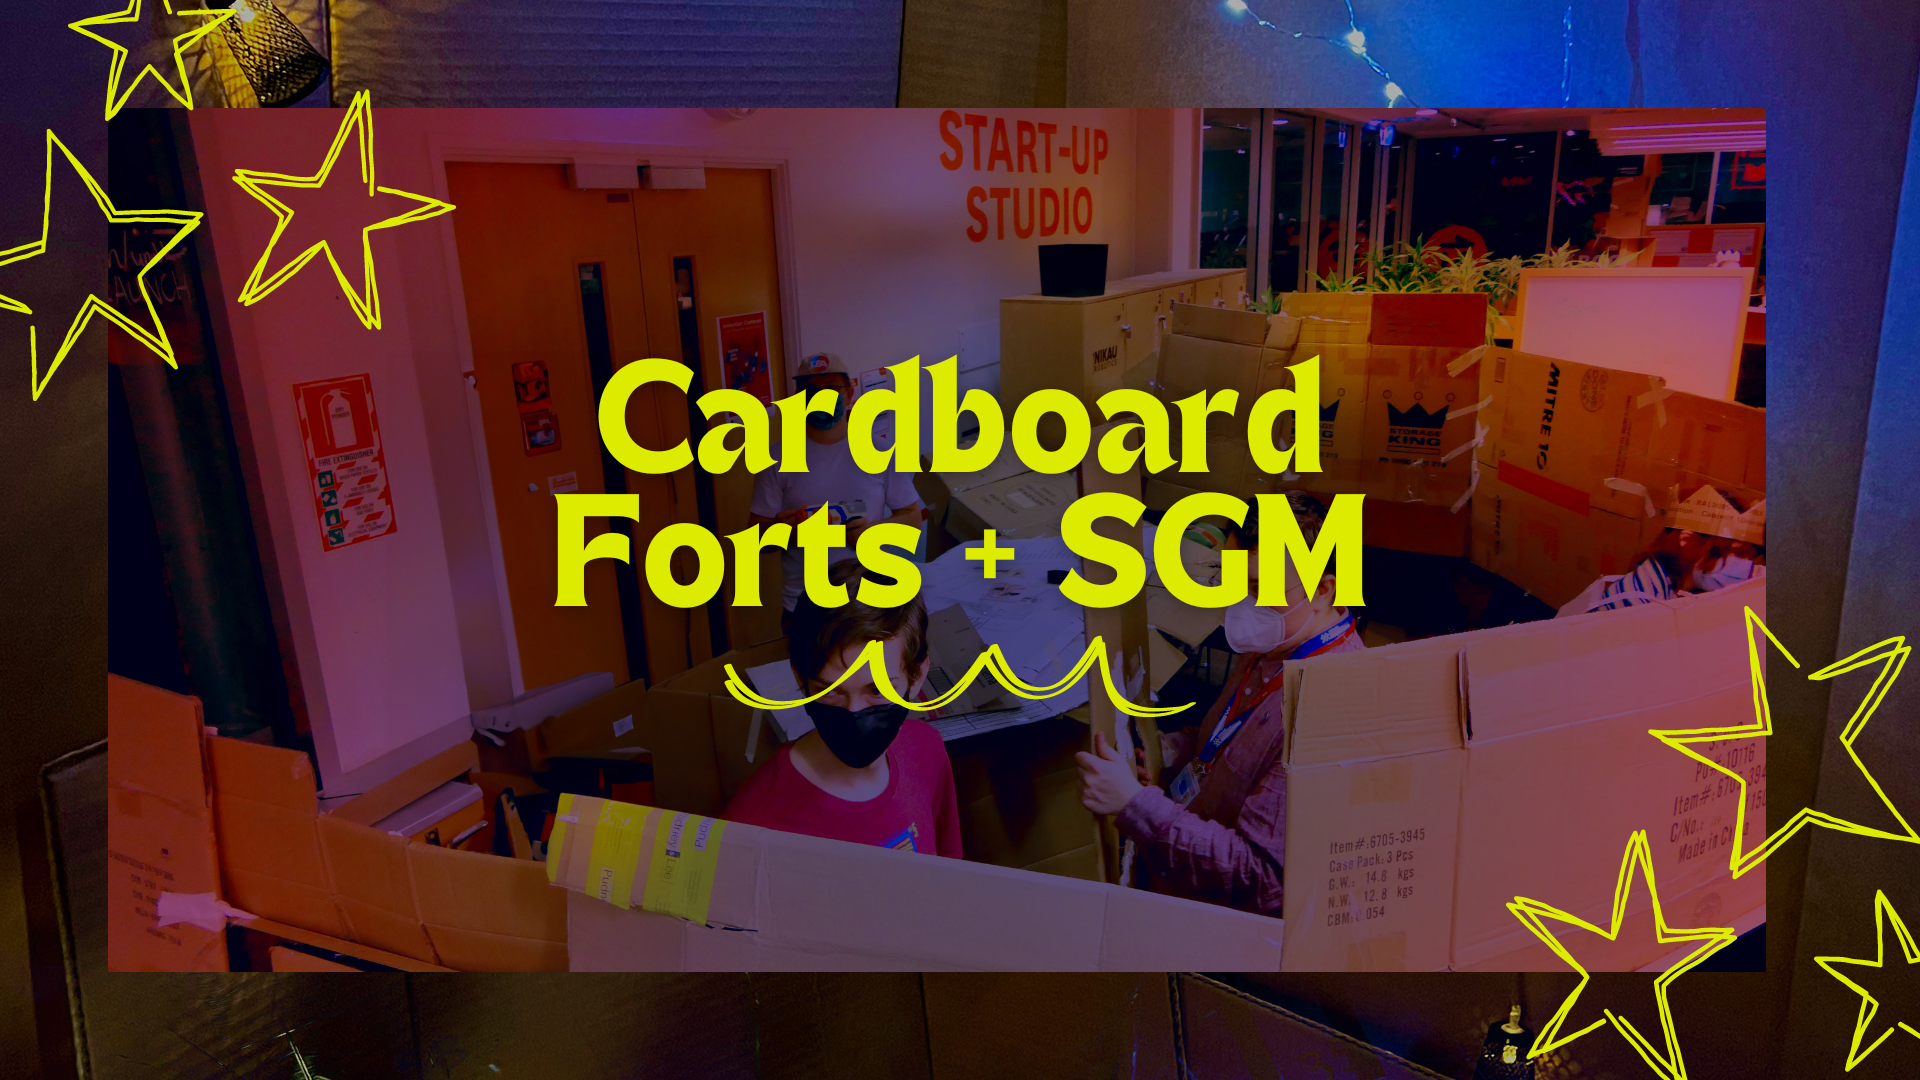 ✨Cardboard Forts 2 and Our SGM: Free Pizza, Forts, and More!✨